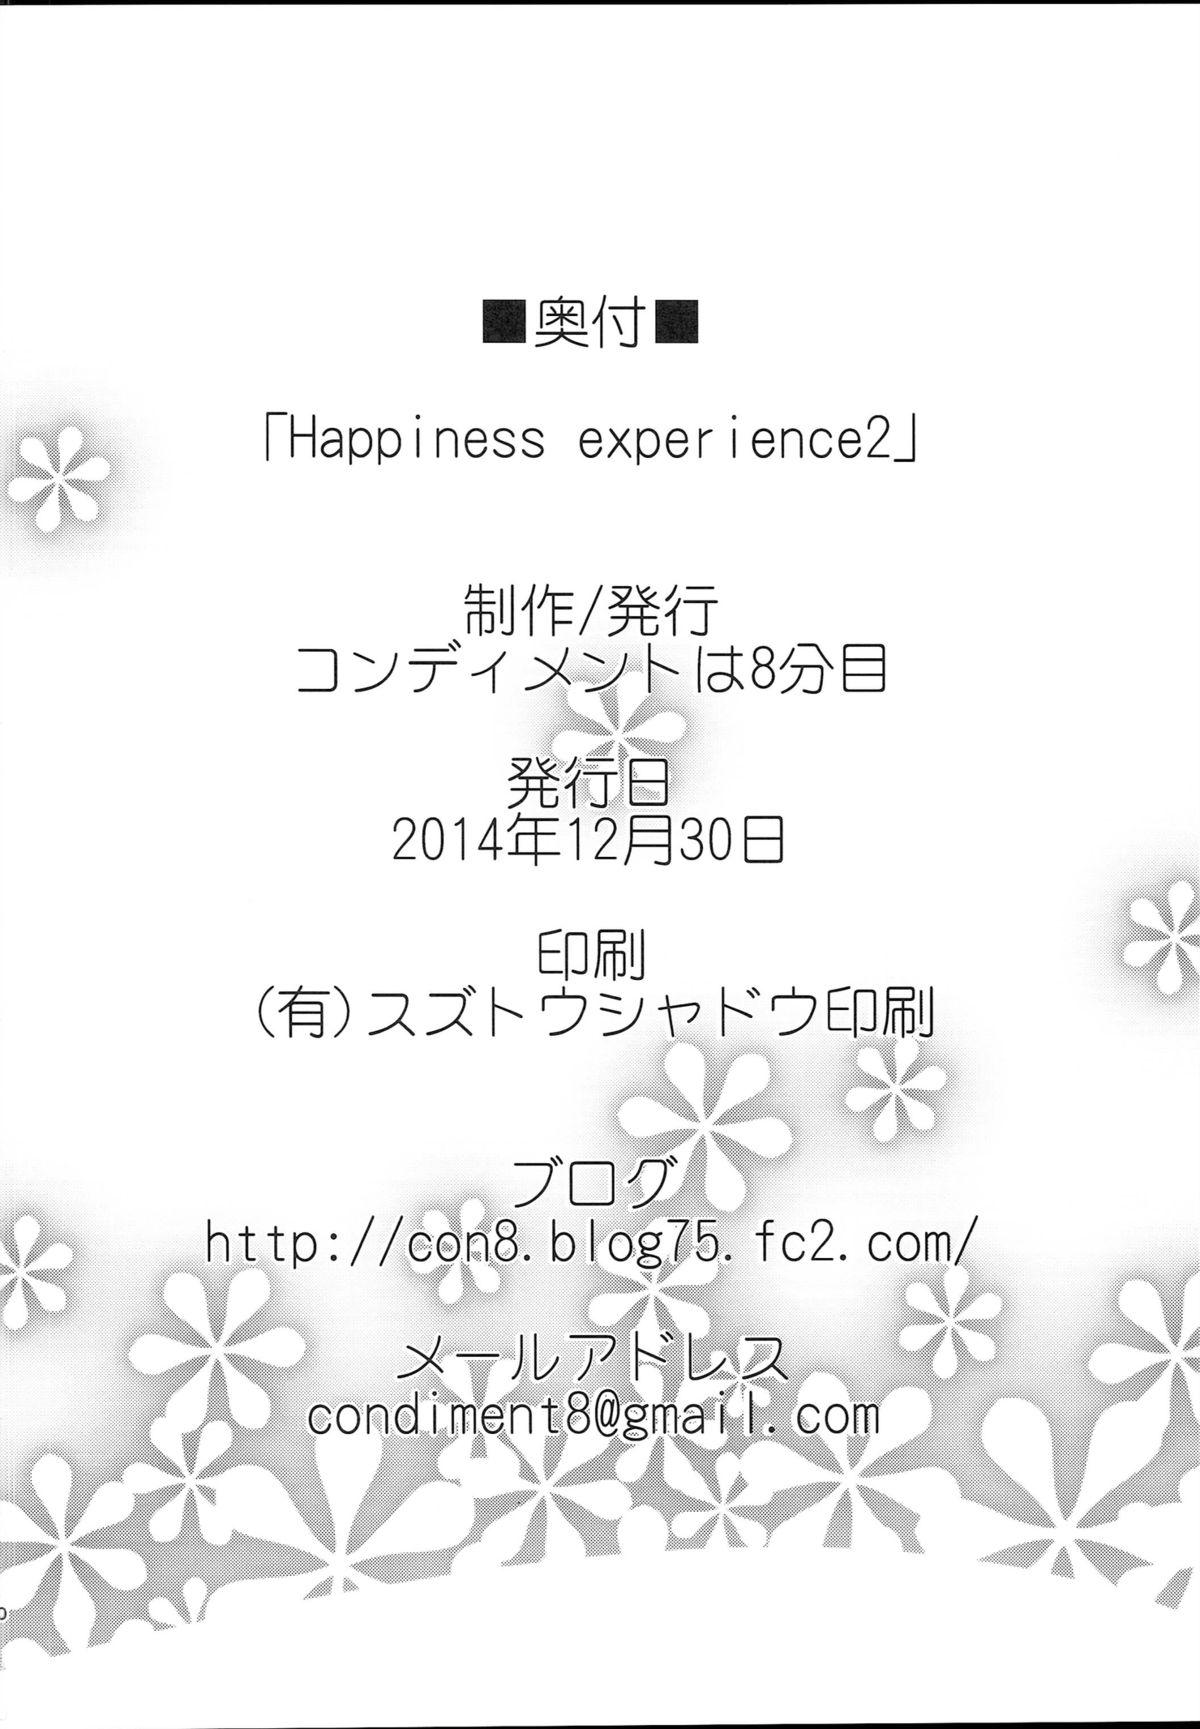 Happiness experience2 28